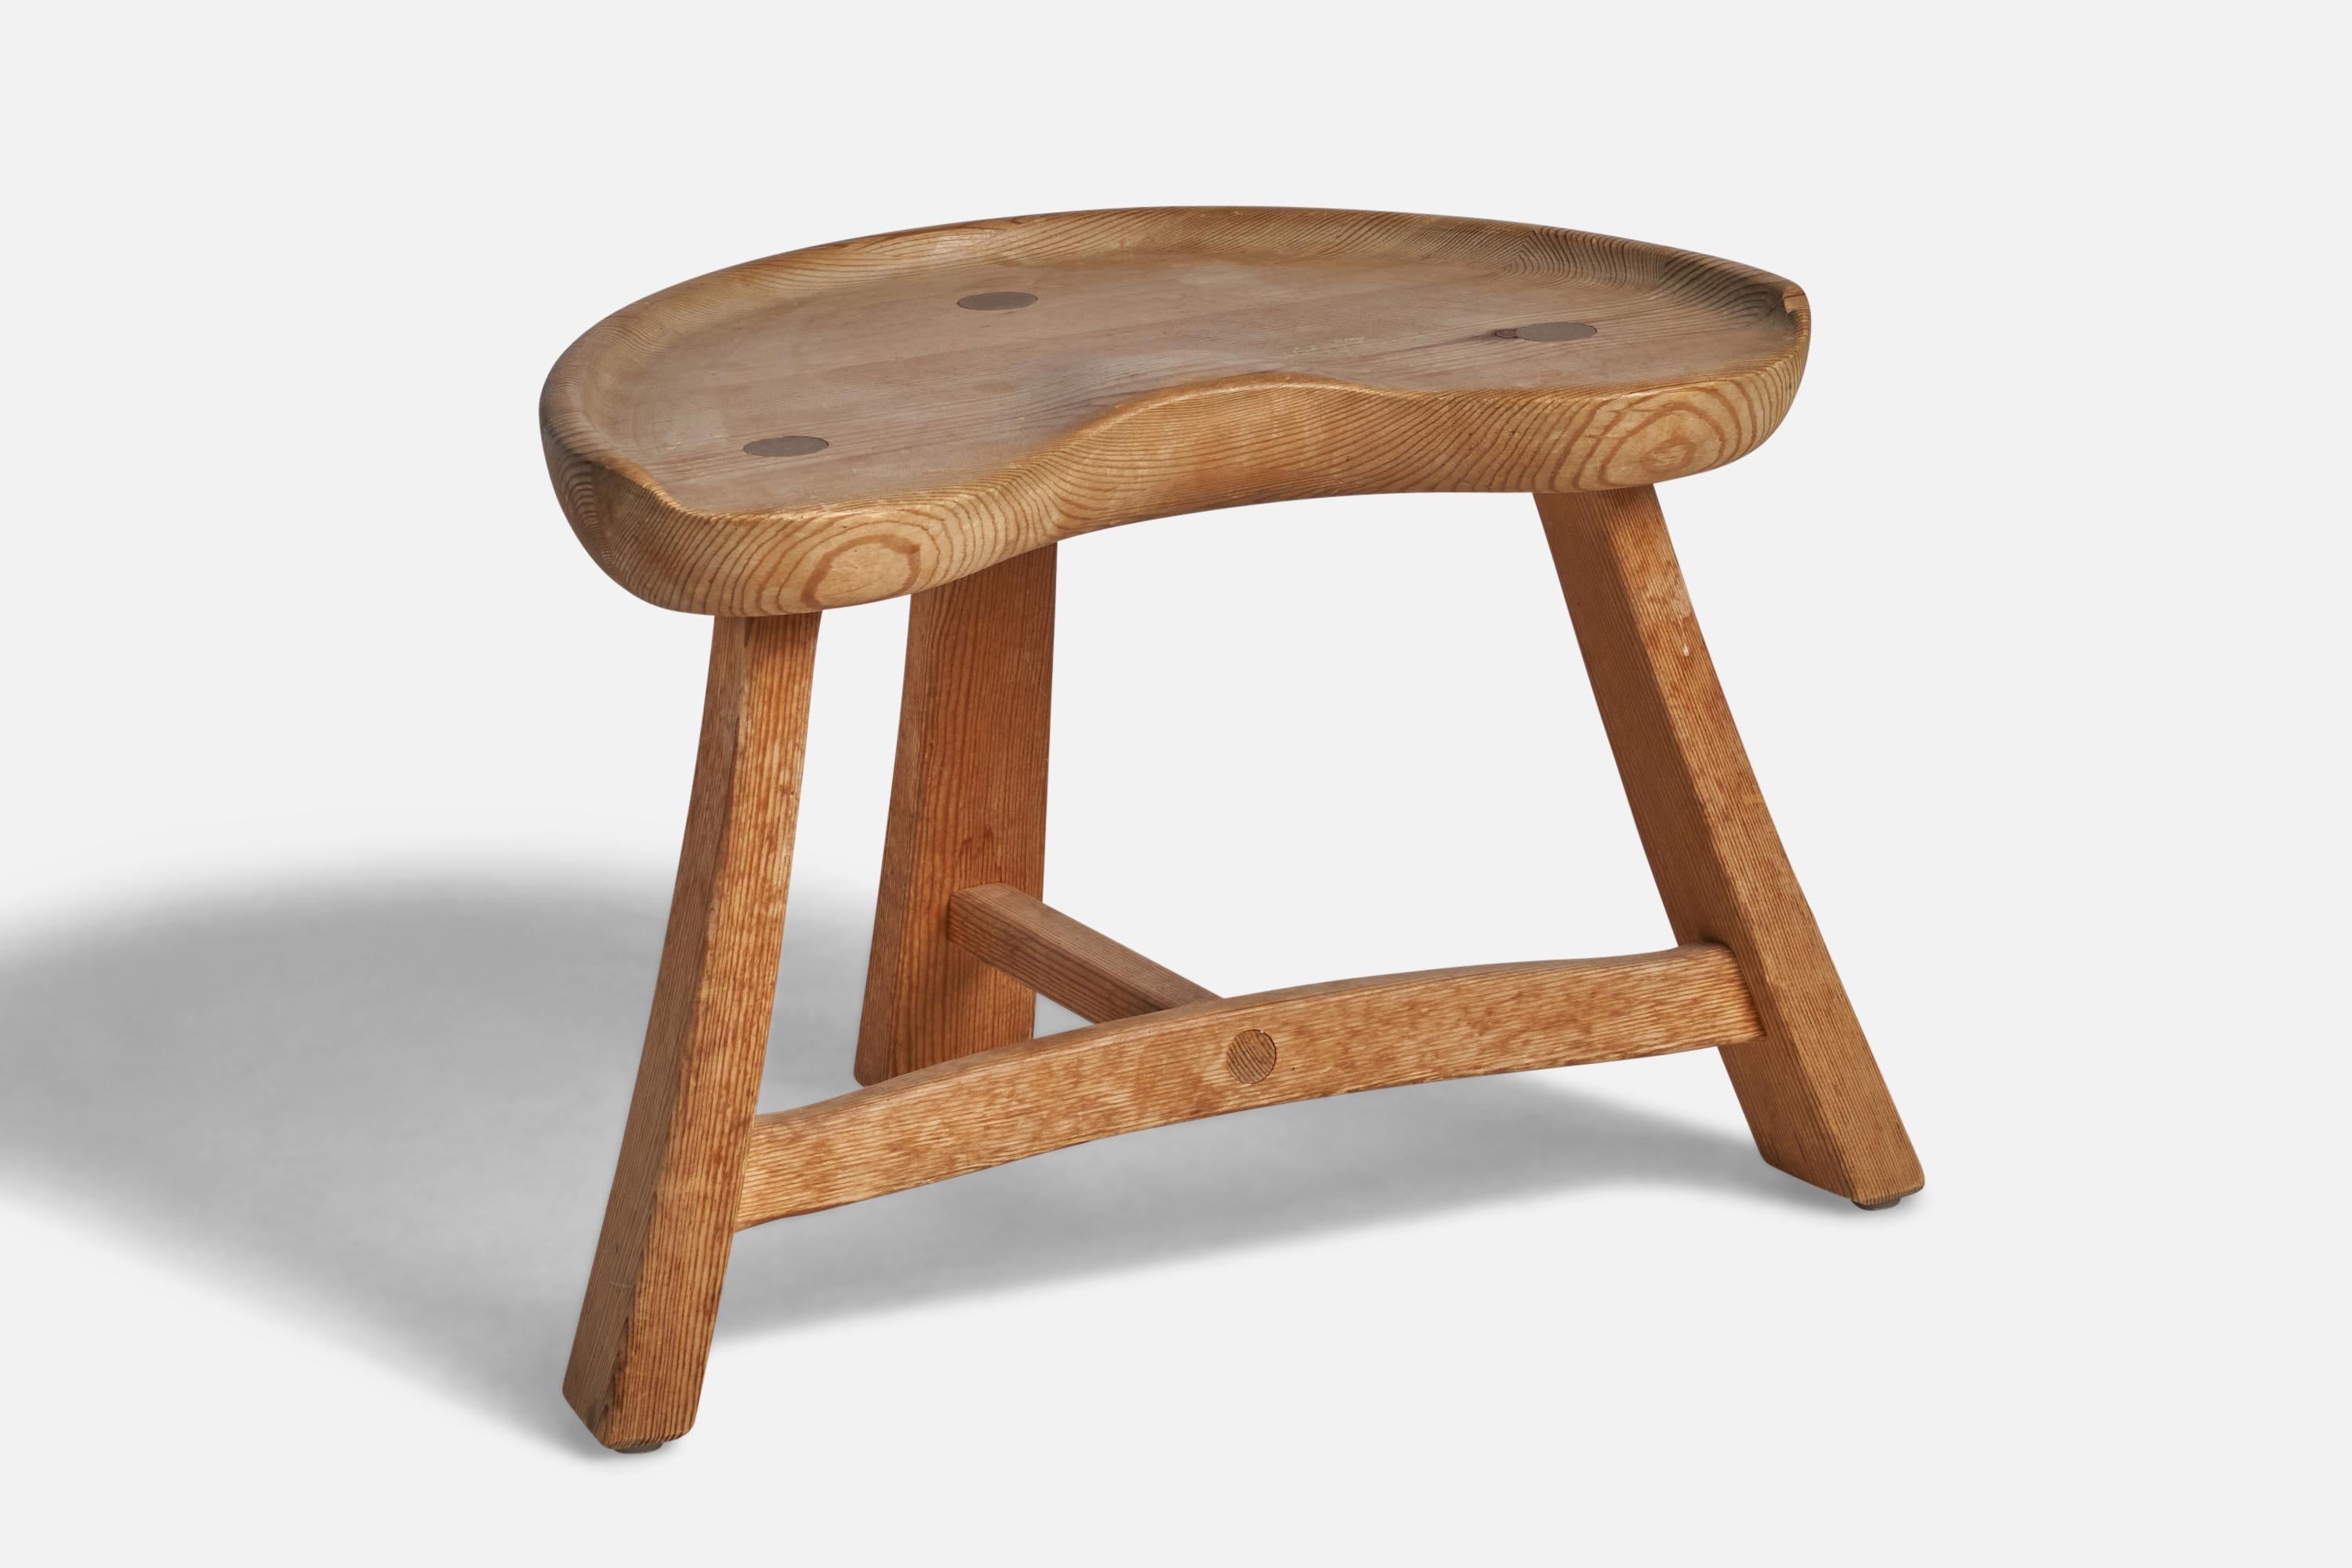 A pine stool designed and produced by Krogenæs Møbler, Norway, 1960s.